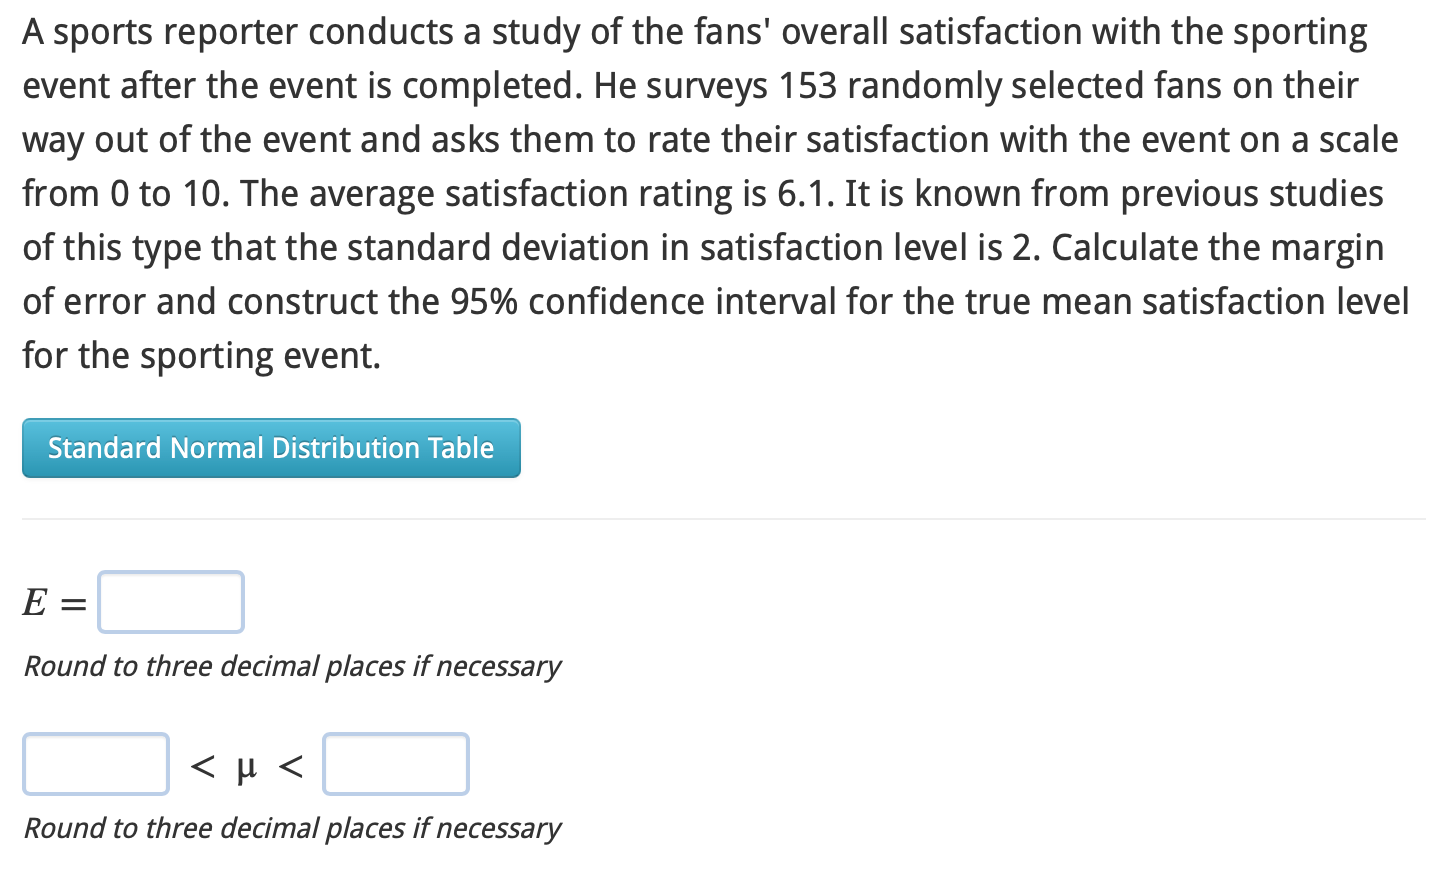 A sports reporter conducts a study of the fans overall satisfaction with the sporting event after the event is completed. He